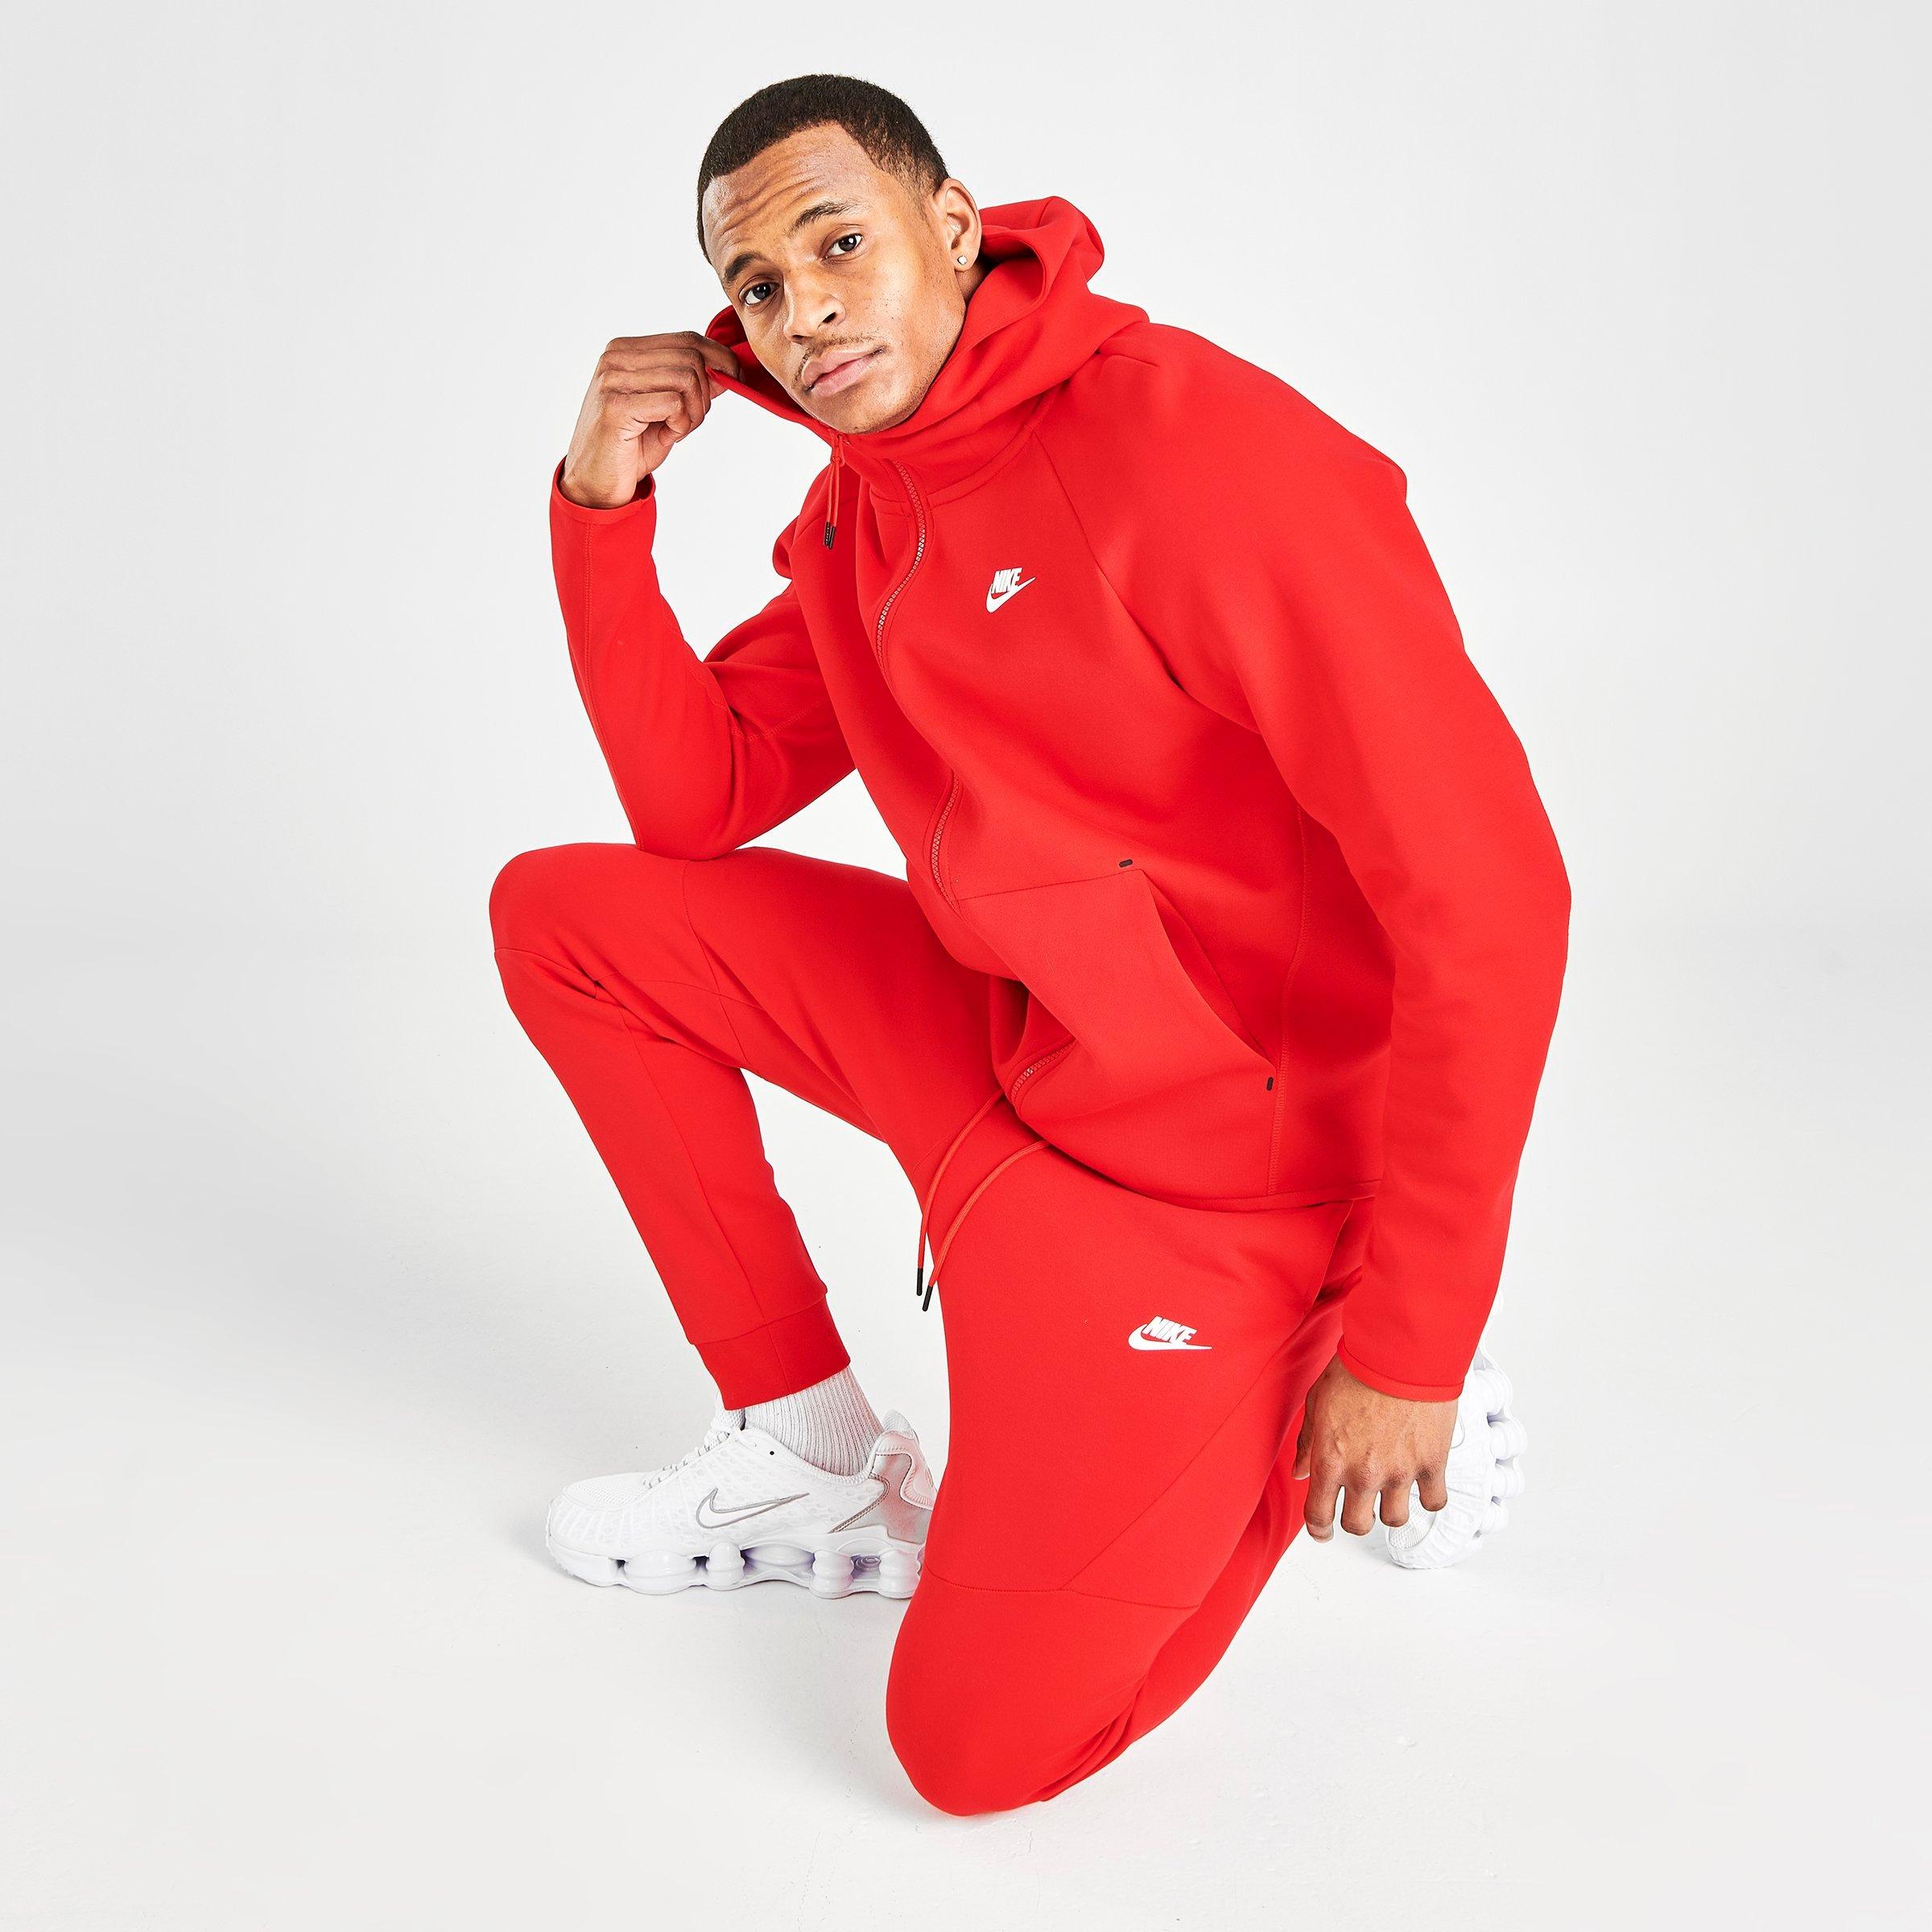 nike red sweat suit